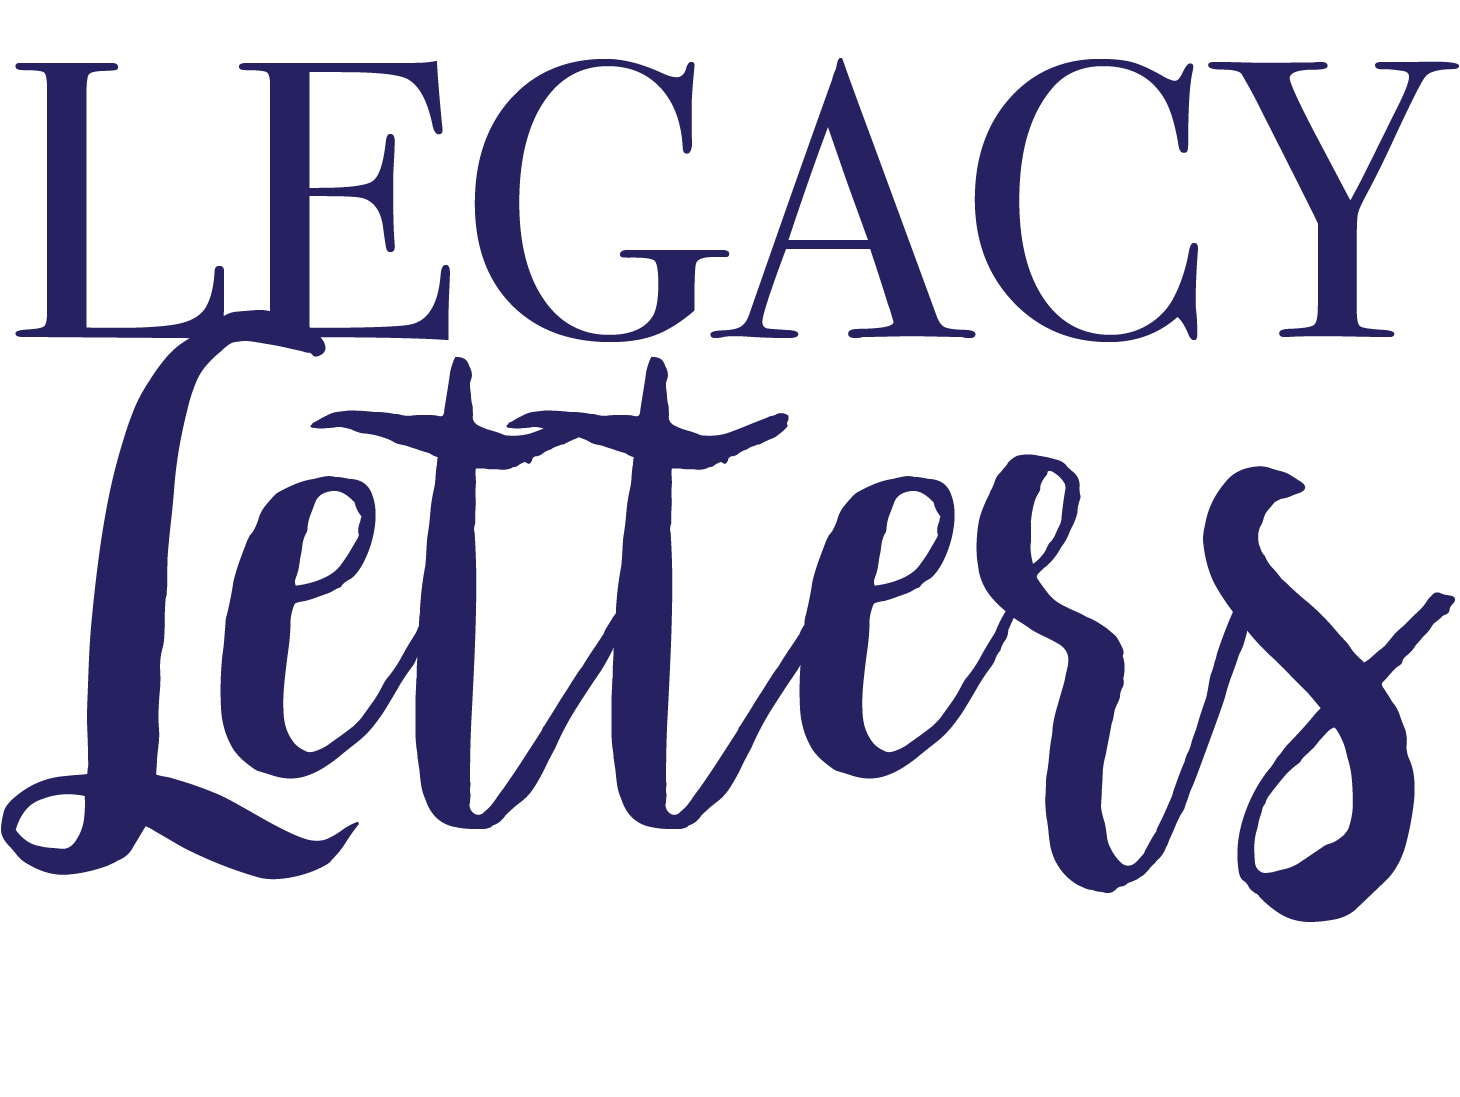 legacy letters title.png